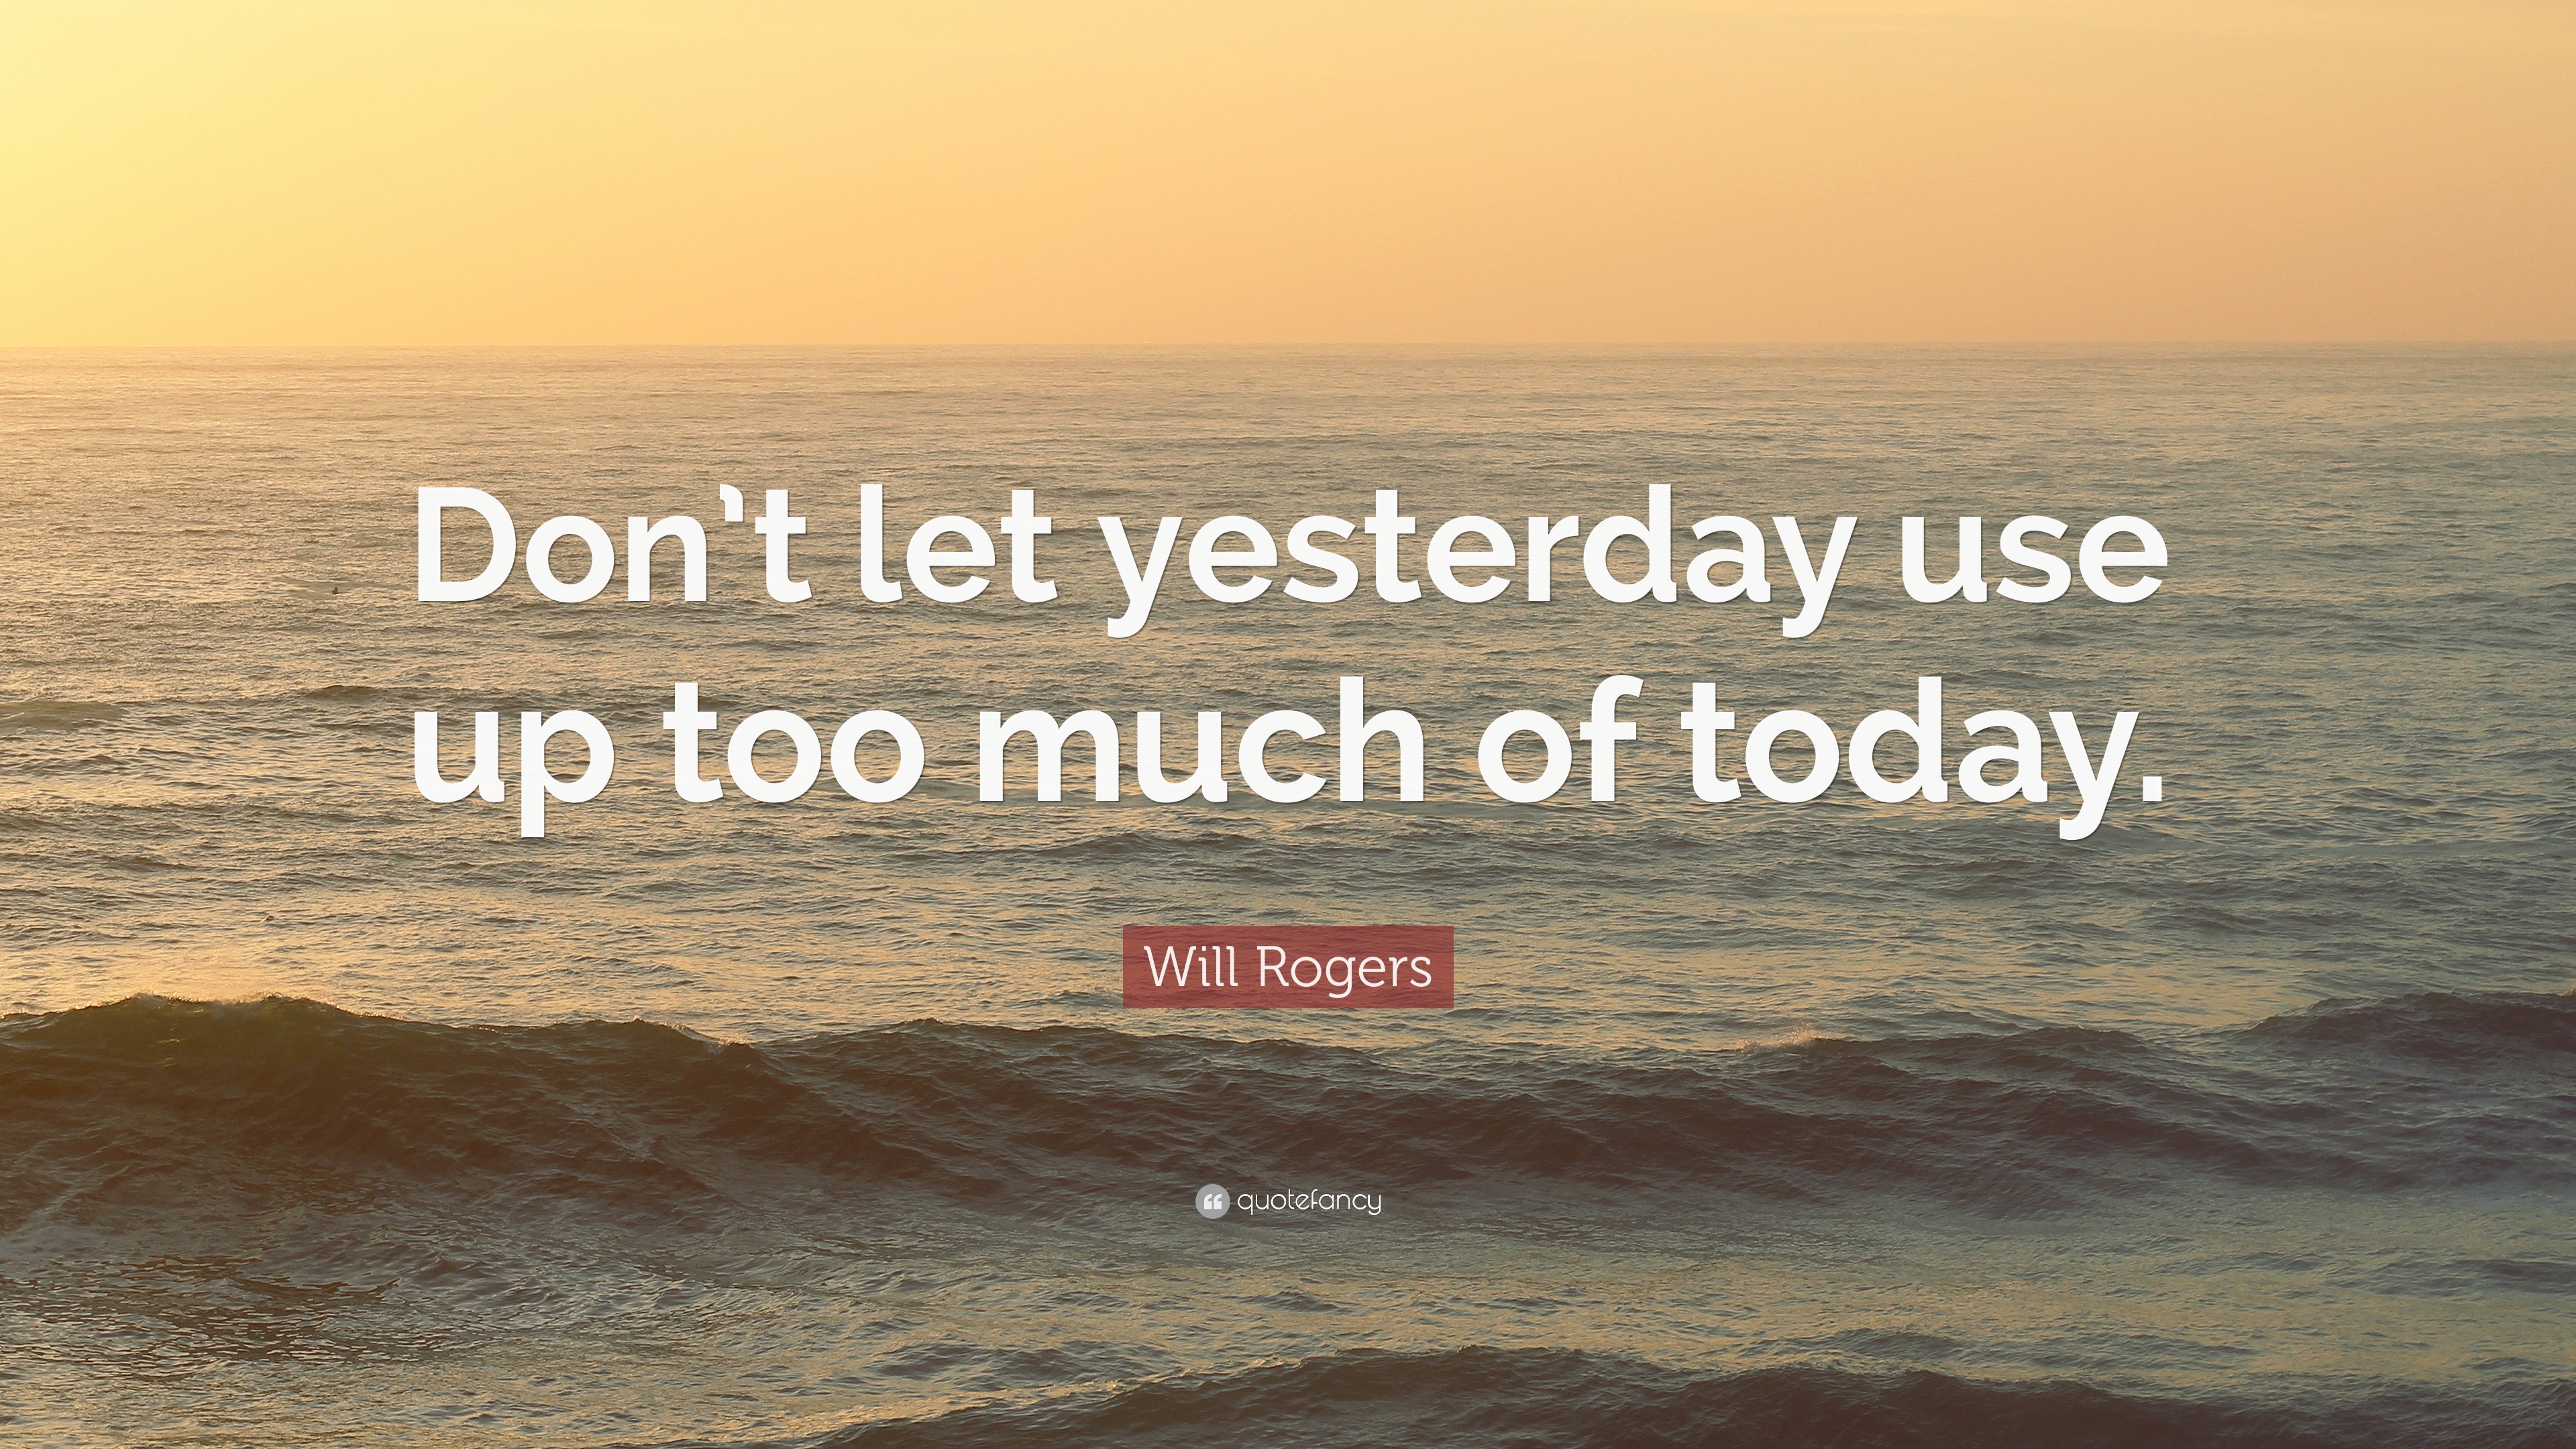 Will Rogers Quote: 